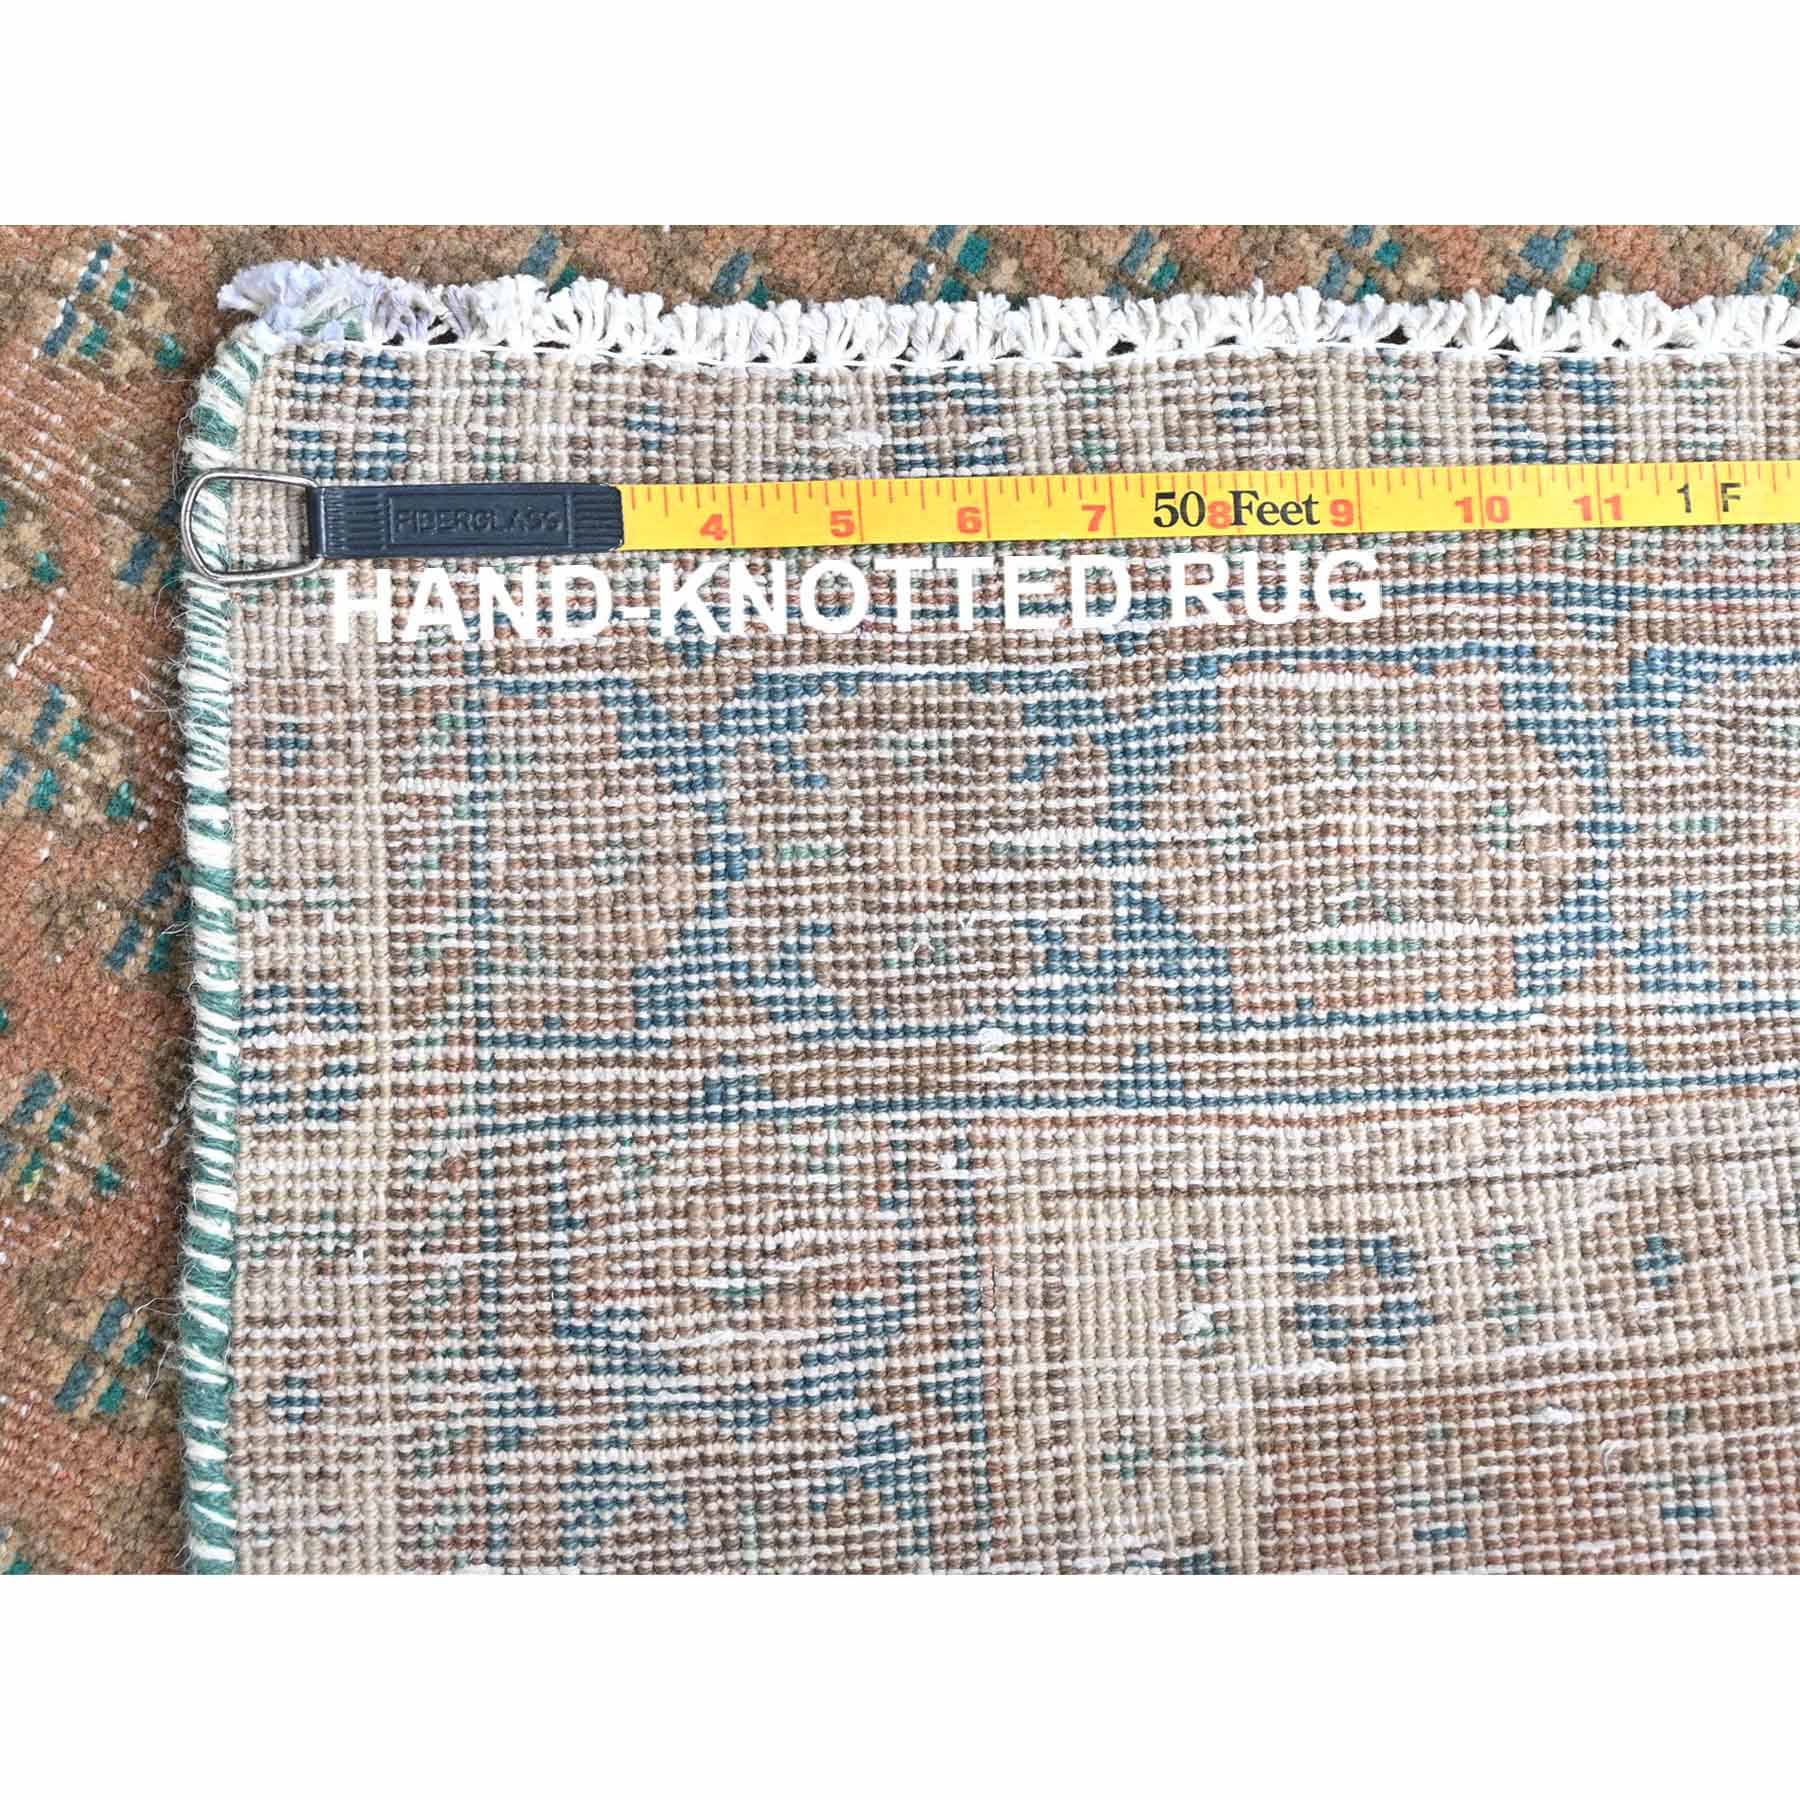 Overdyed-Vintage-Hand-Knotted-Rug-409405